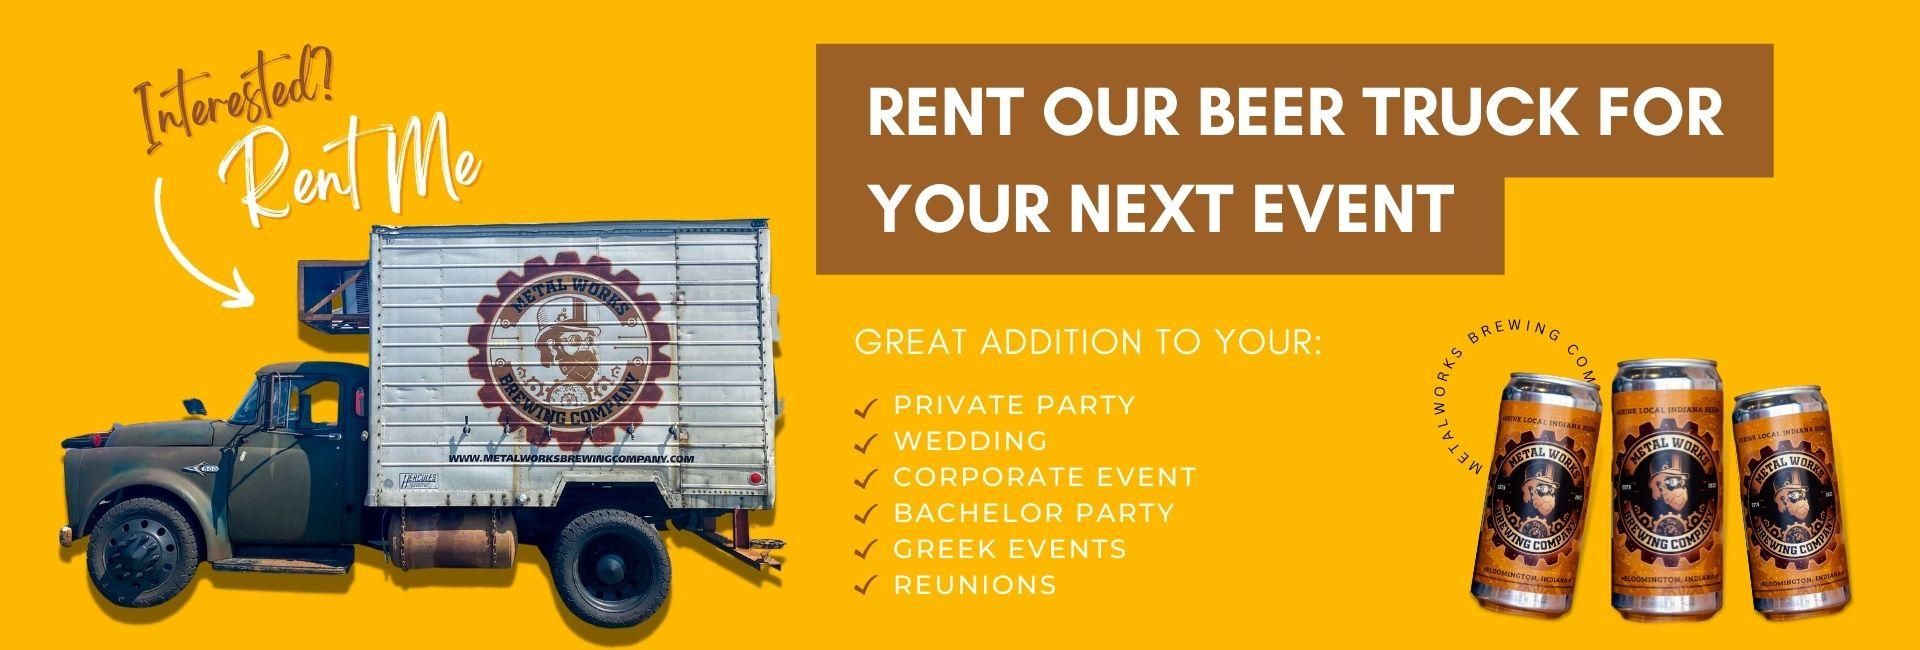 beer truck for rent Indiana